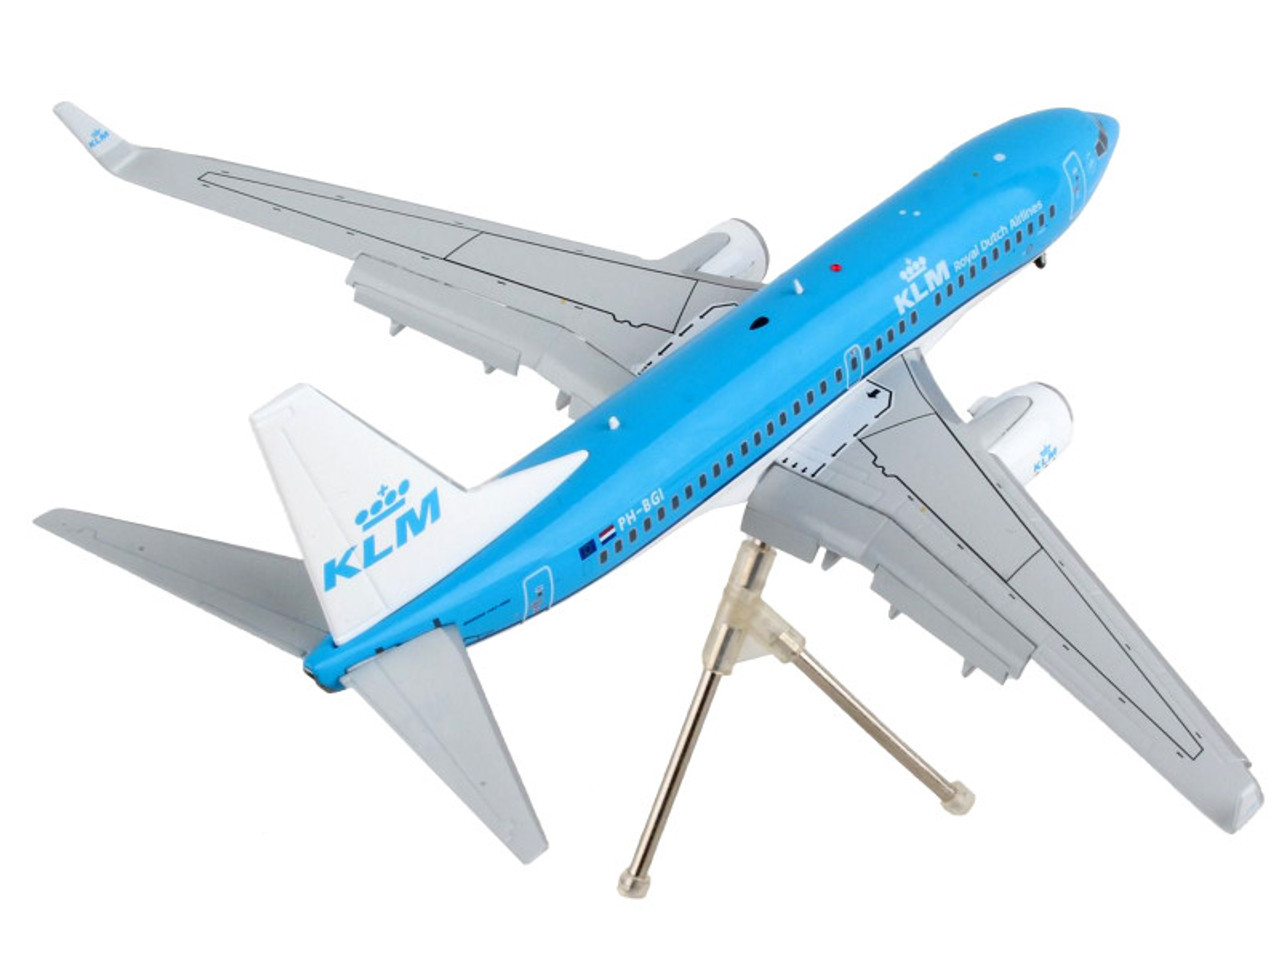 Boeing 737-700 Commercial Aircraft with Flaps Down "KLM Royal Dutch Airlines" Blue with White Tail "Gemini 200" Series 1/200 Diecast Model Airplane by GeminiJets